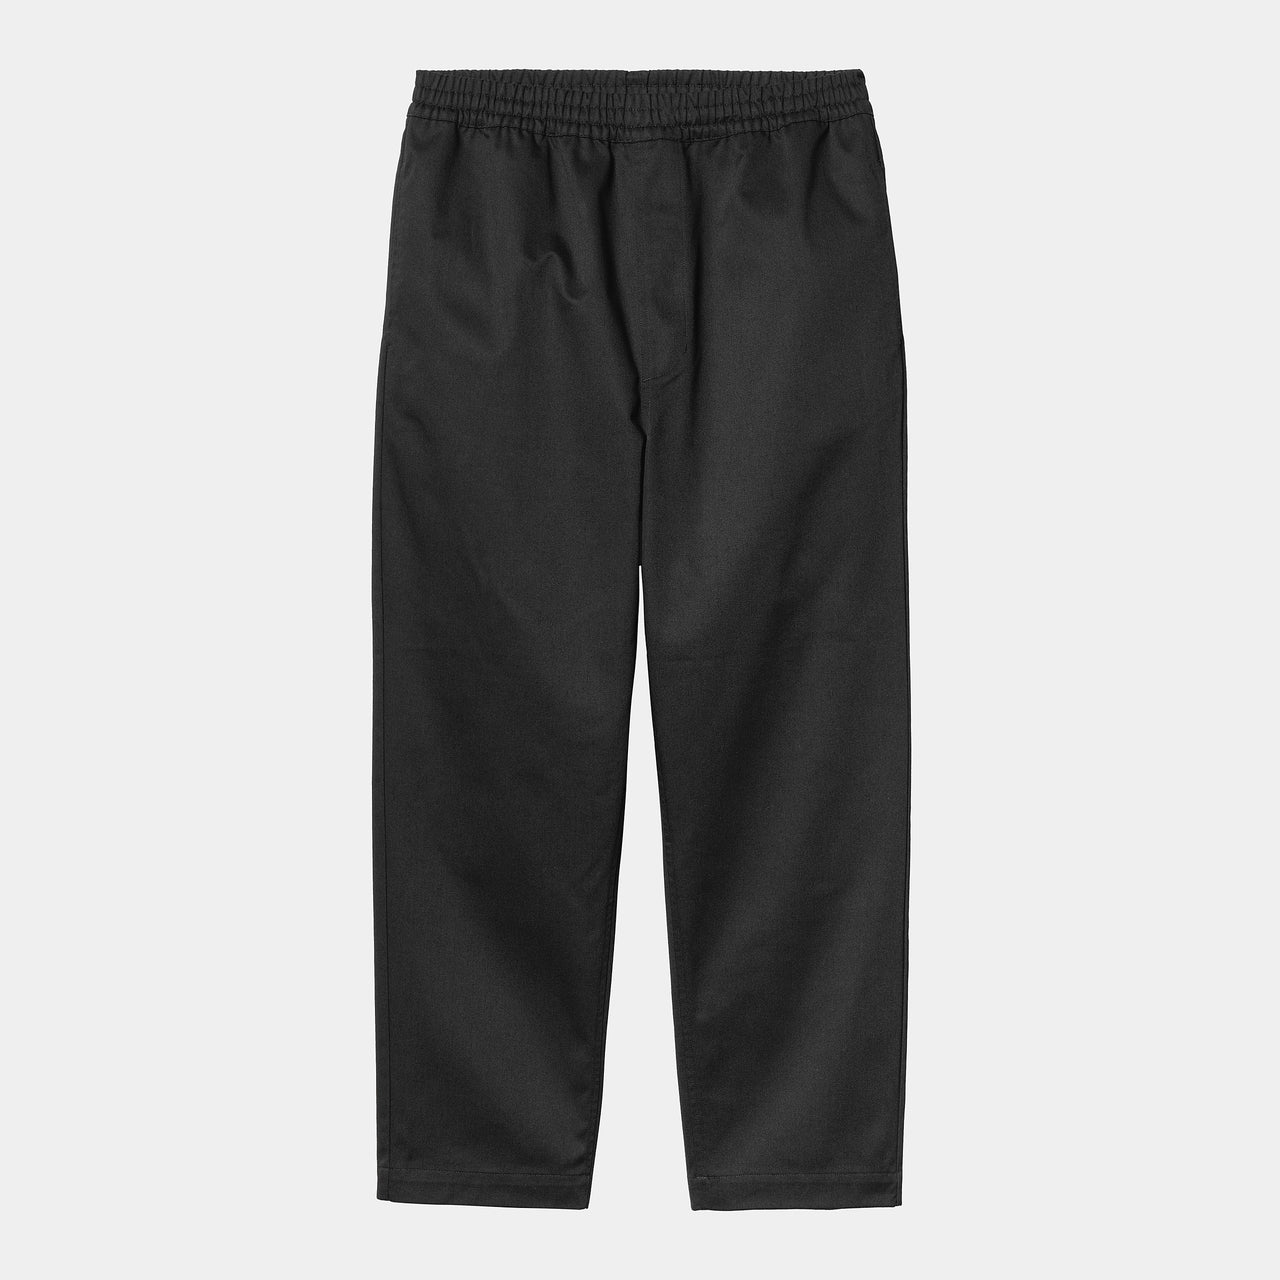 NEWHAVEN PANTS BY CARHARTT WIP